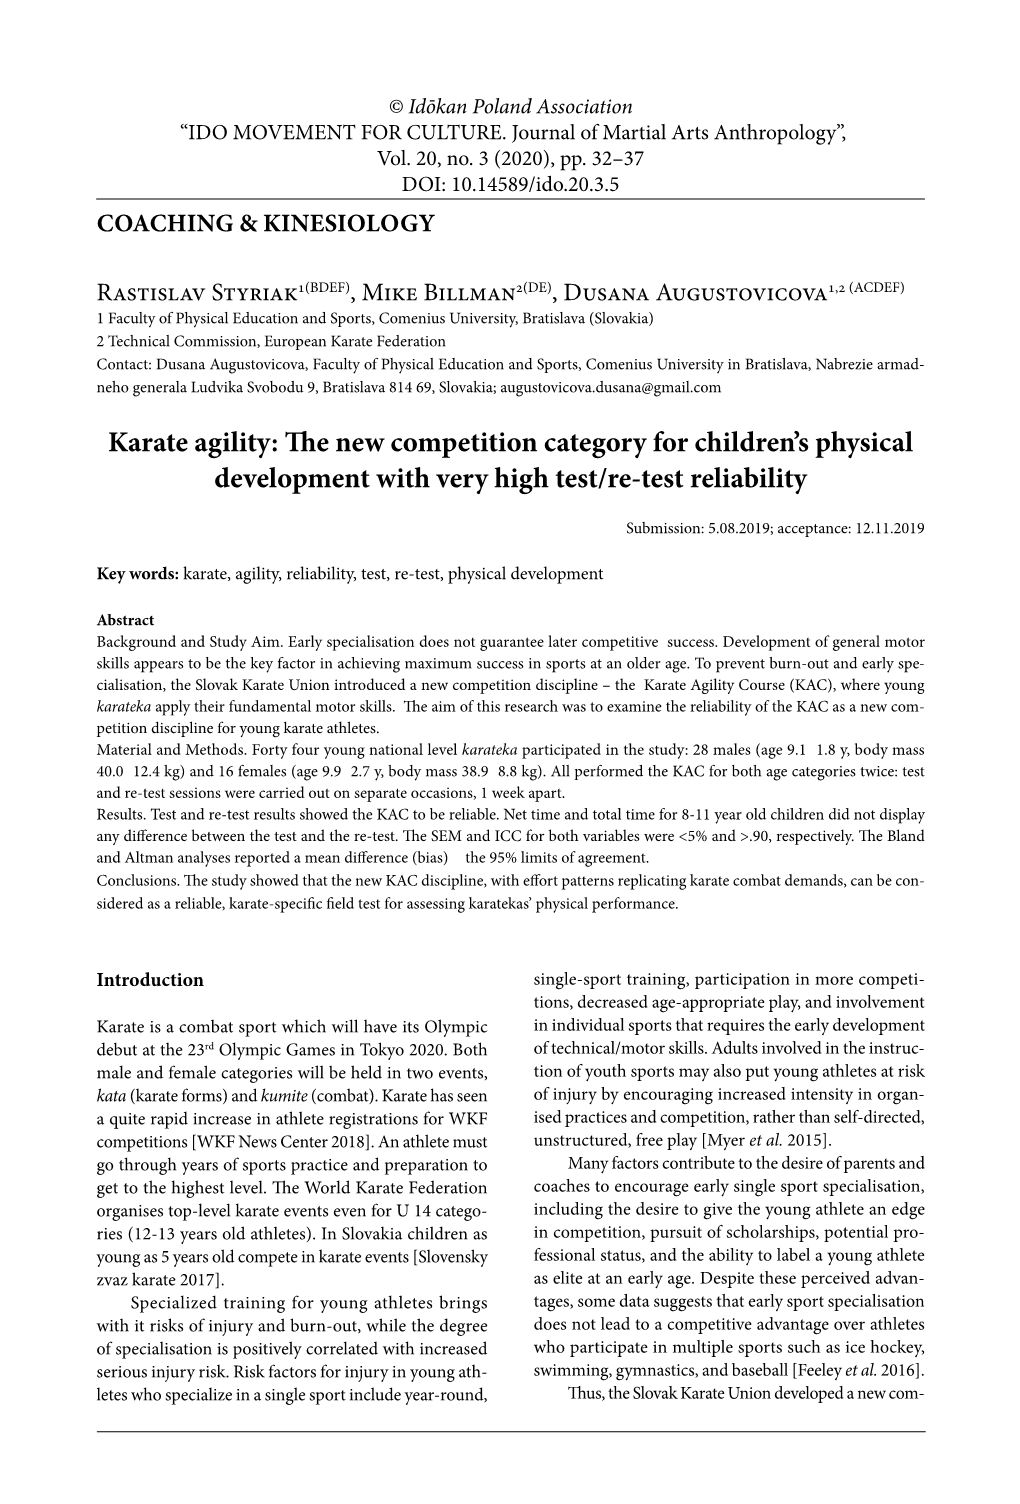 Karate Agility: the New Competition Category for Children’S Physical Development with Very High Test/Re-Test Reliability